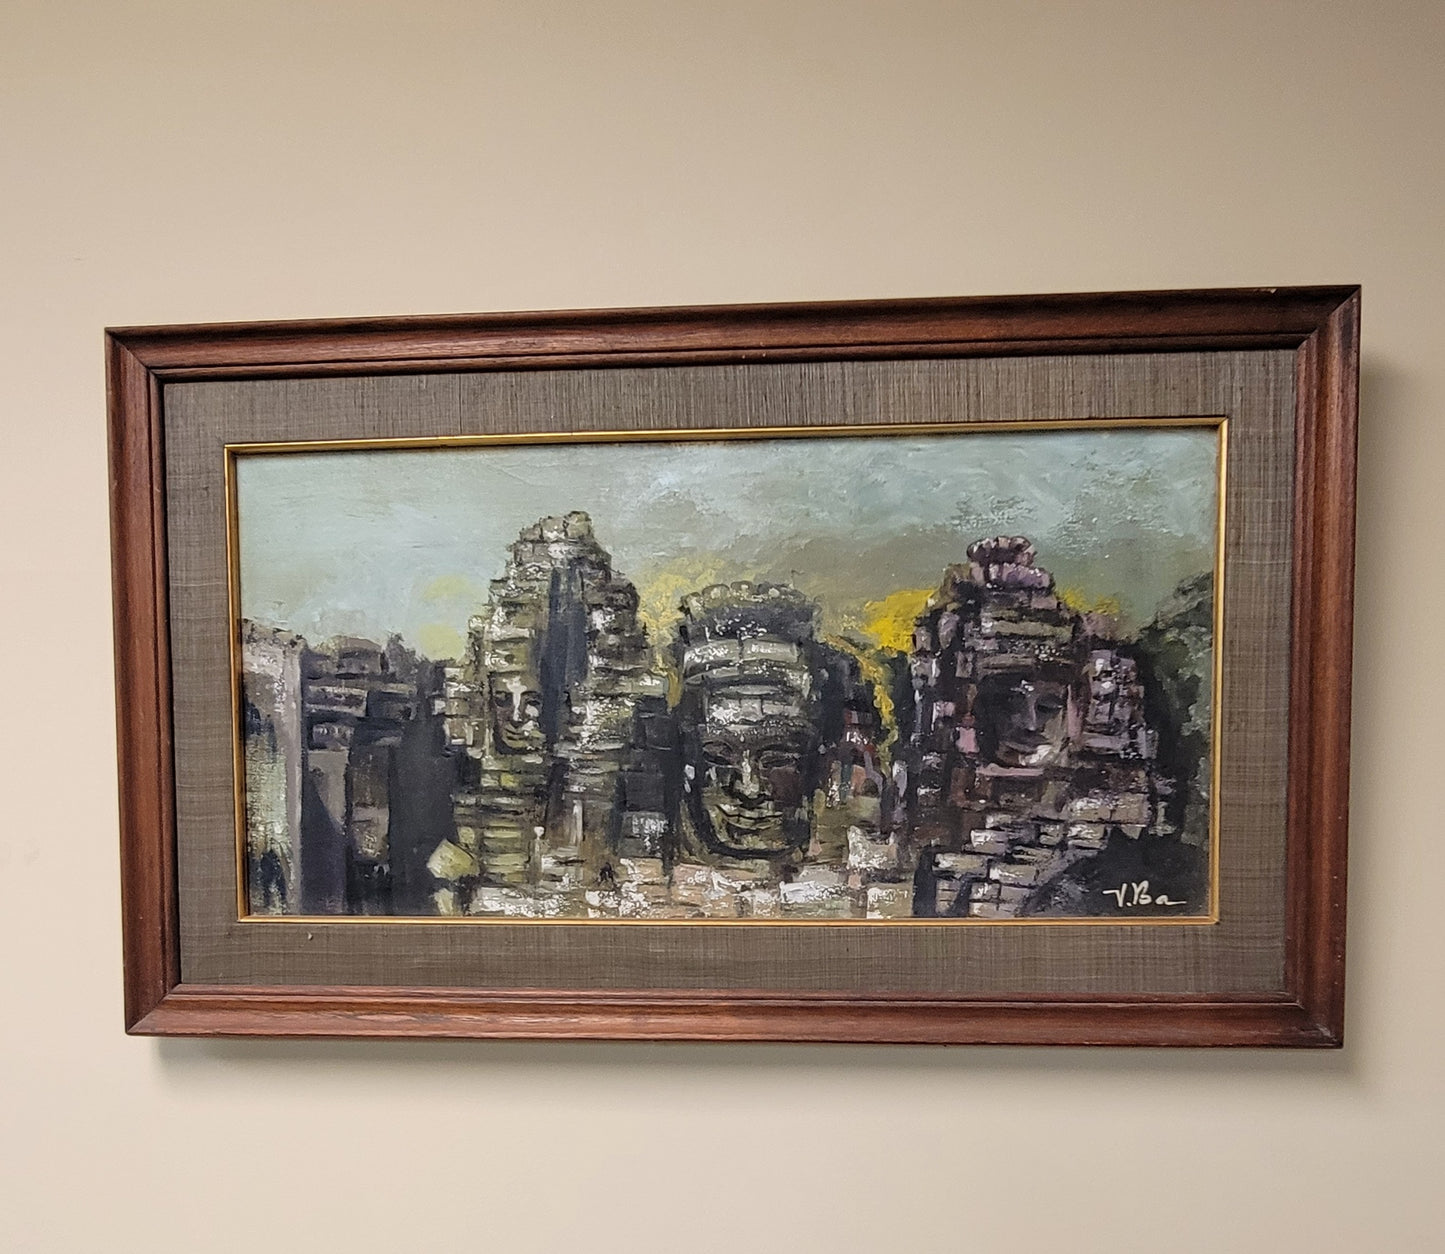 Vintage Mid-Century Signed Scenic Oil Painting on Canvas (Mt. Rushmore-Style)